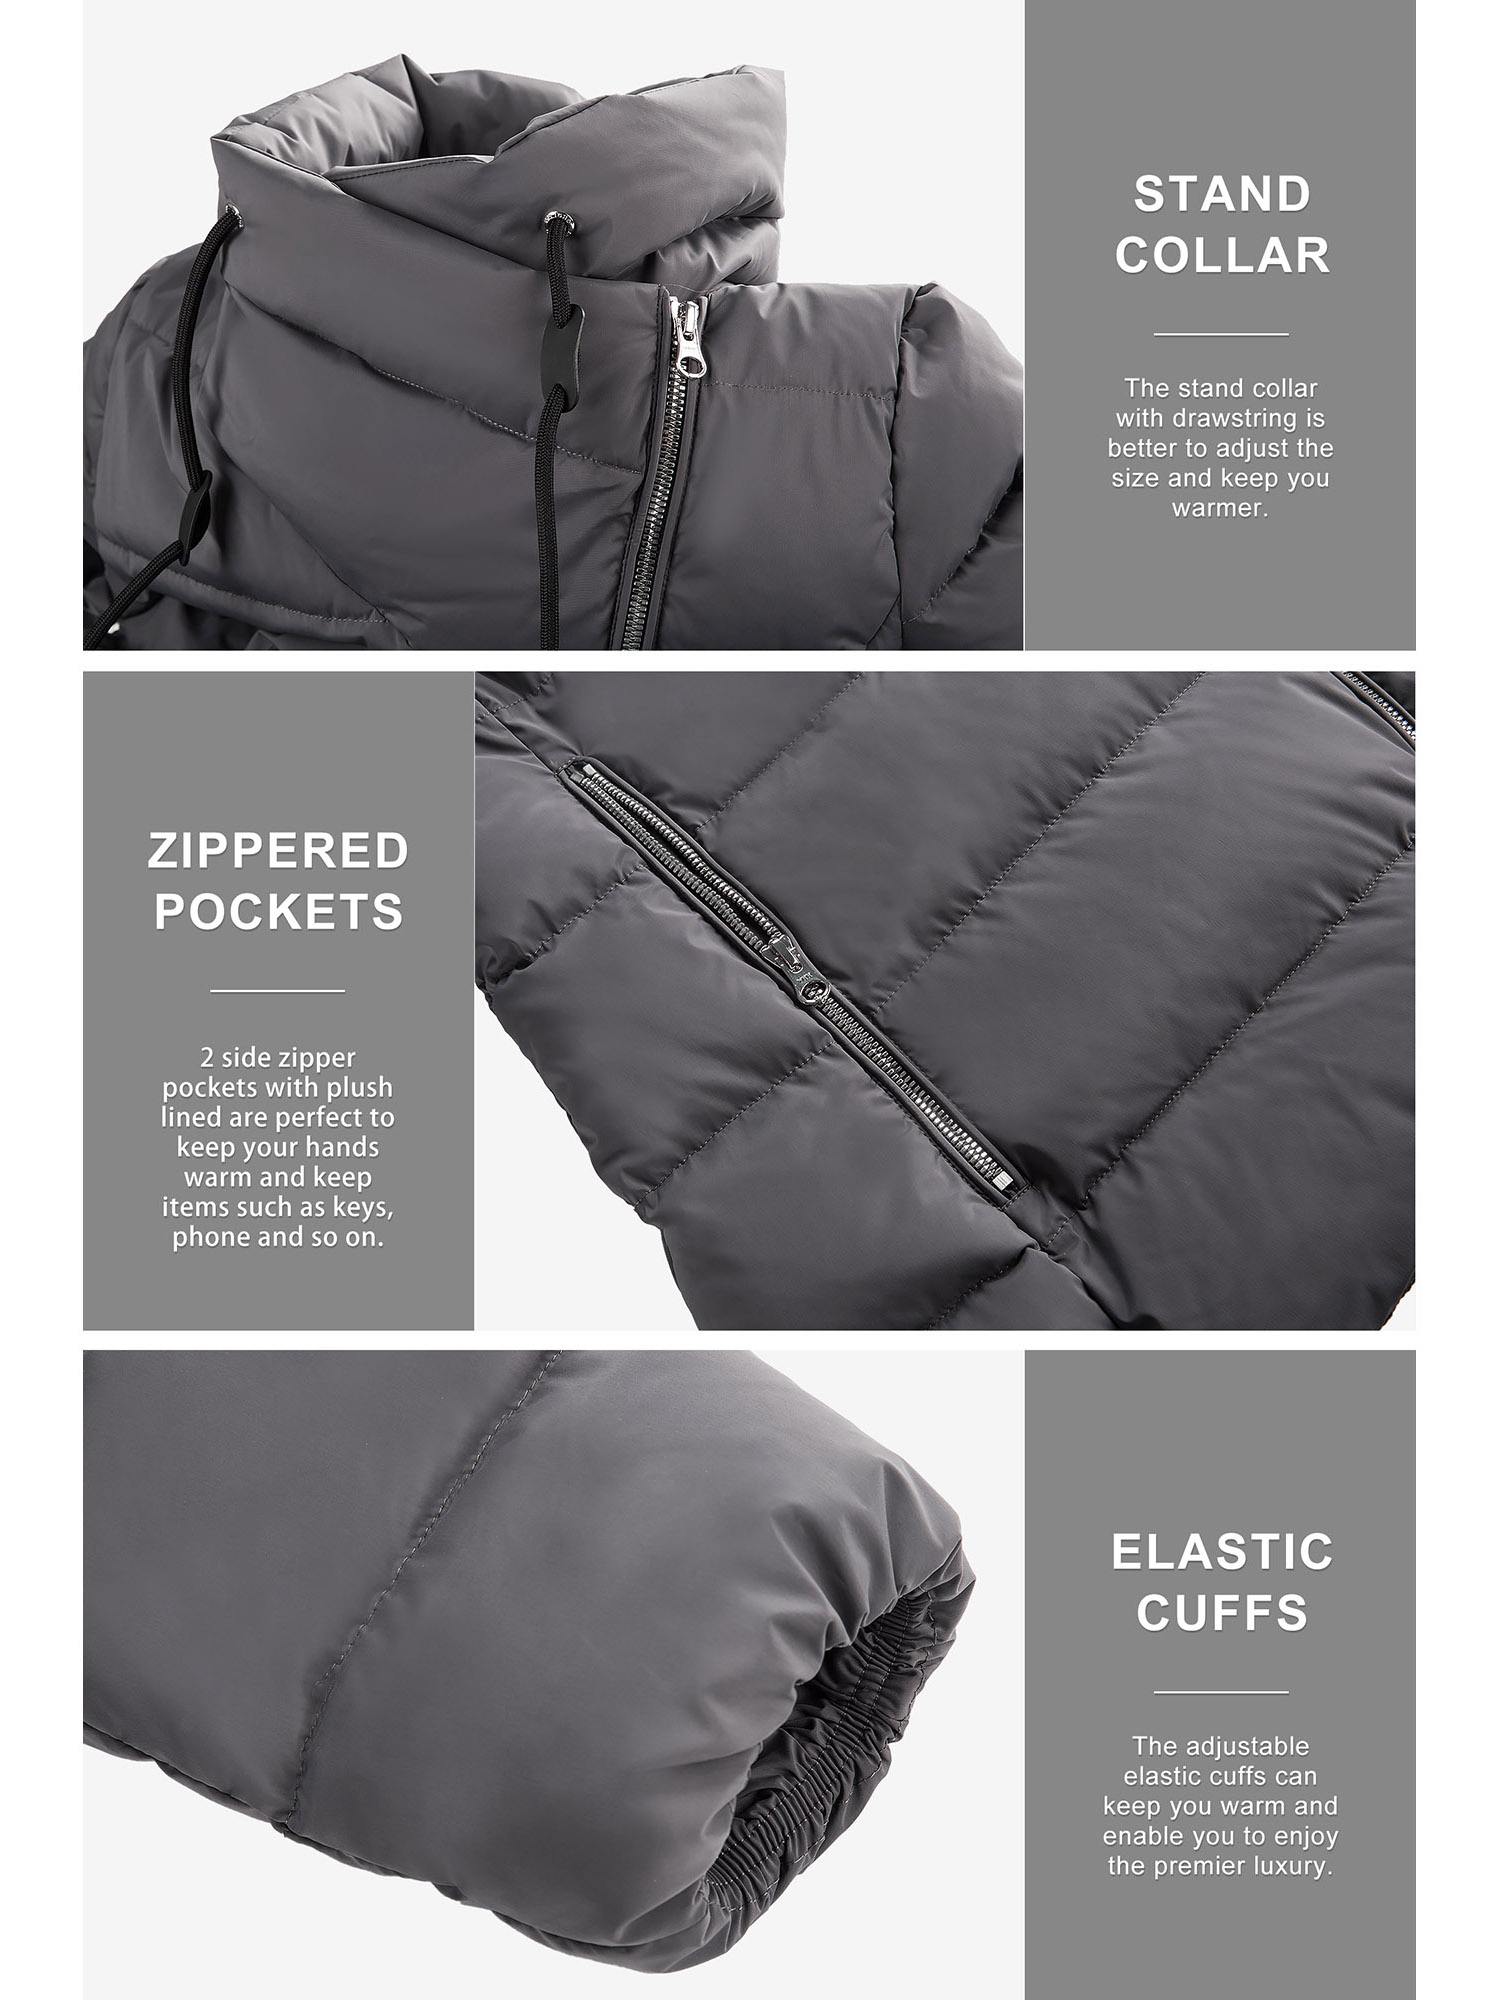 Orolay Hooded Down Jacket Women Winter Stand Collar Oblique Placket Puffer Coat - image 4 of 5